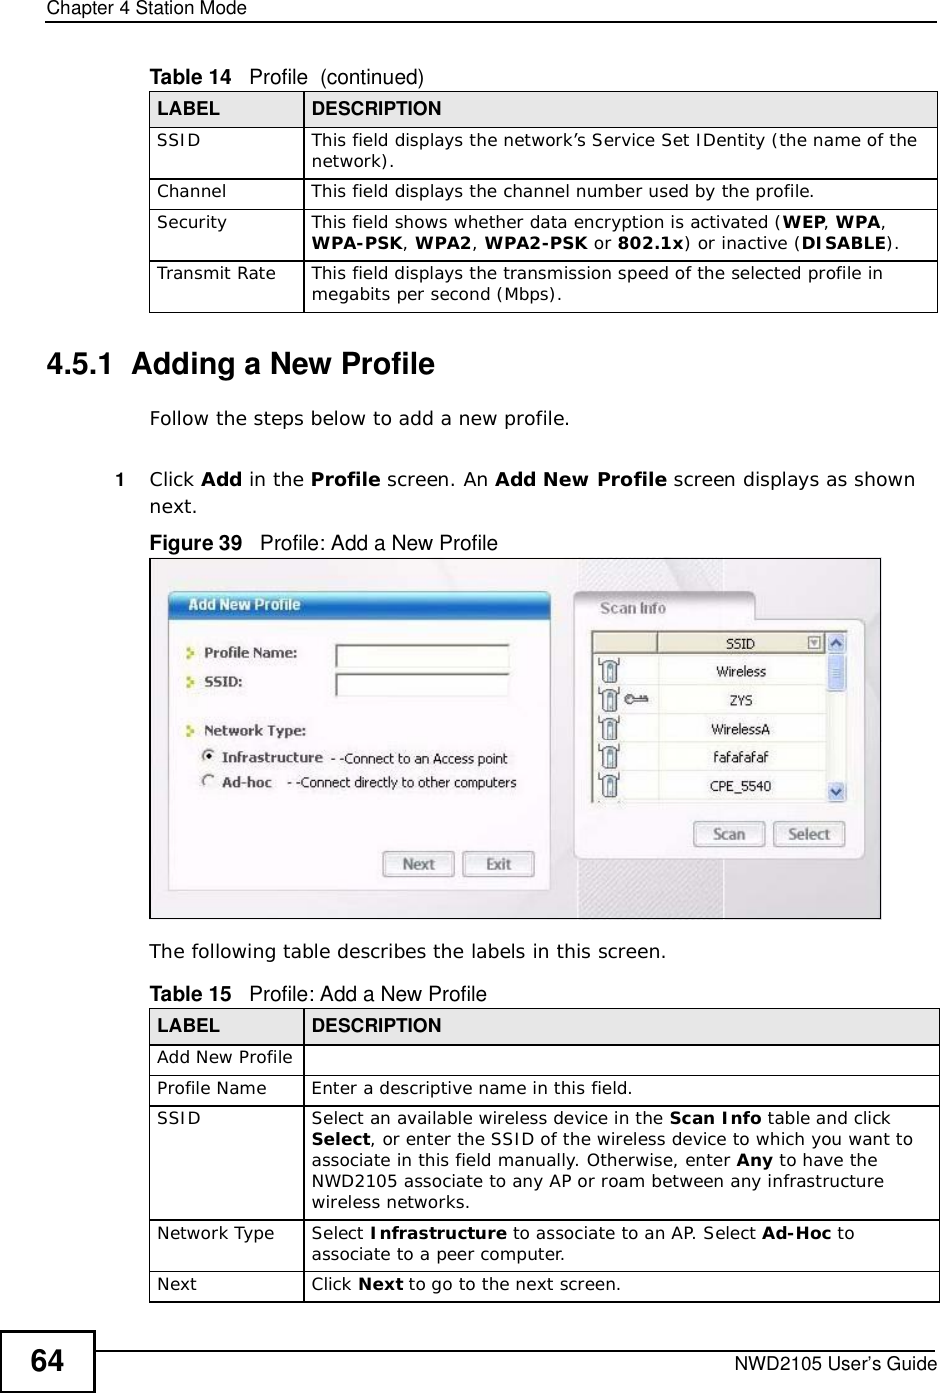 Chapter 4Station ModeNWD2105 User’s Guide644.5.1  Adding a New ProfileFollow the steps below to add a new profile.1Click Add in the Profile screen. An Add New Profile screen displays as shown next. Figure 39   Profile: Add a New Profile The following table describes the labels in this screen. SSIDThis field displays the network’s Service Set IDentity (the name of the network).ChannelThis field displays the channel number used by the profile.SecurityThis field shows whether data encryption is activated (WEP,WPA,WPA-PSK,WPA2,WPA2-PSK or 802.1x) or inactive (DISABLE).Transmit RateThis field displays the transmission speed of the selected profile in megabits per second (Mbps).Table 14   Profile  (continued)LABEL DESCRIPTIONTable 15   Profile: Add a New Profile LABEL DESCRIPTIONAdd New ProfileProfile NameEnter a descriptive name in this field.SSIDSelect an available wireless device in the Scan Info table and click Select, or enter the SSID of the wireless device to which you want to associate in this field manually. Otherwise, enter Any to have the NWD2105 associate to any AP or roam between any infrastructure wireless networks.Network TypeSelect Infrastructure to associate to an AP. Select Ad-Hoc to associate to a peer computer.NextClick Next to go to the next screen.